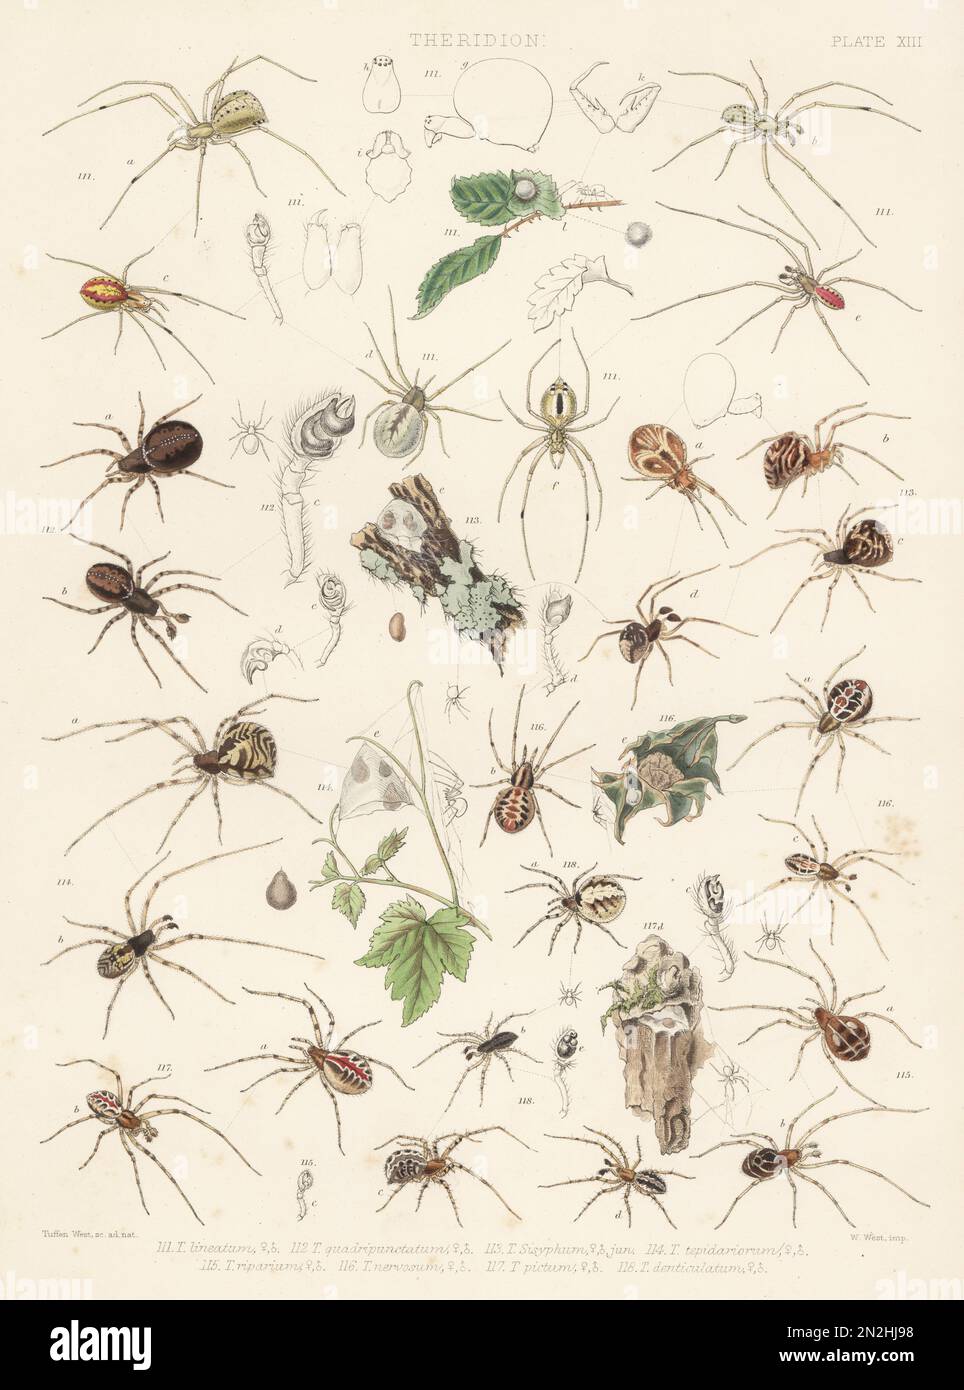 Common house spider, Achaearanea tepidariorum 114, Achaearanea riparia 115, tangle-web spider, Theridion sisyphium 116, cobweb spiders, Theridion pictum 117, and Theridion melanurum 118. Handcoloured lithograph by W. West after Tuffen West from John Blackwall’s A History of the Spiders of Great Britain and Ireland, Ray Society, London, 1861. Stock Photo